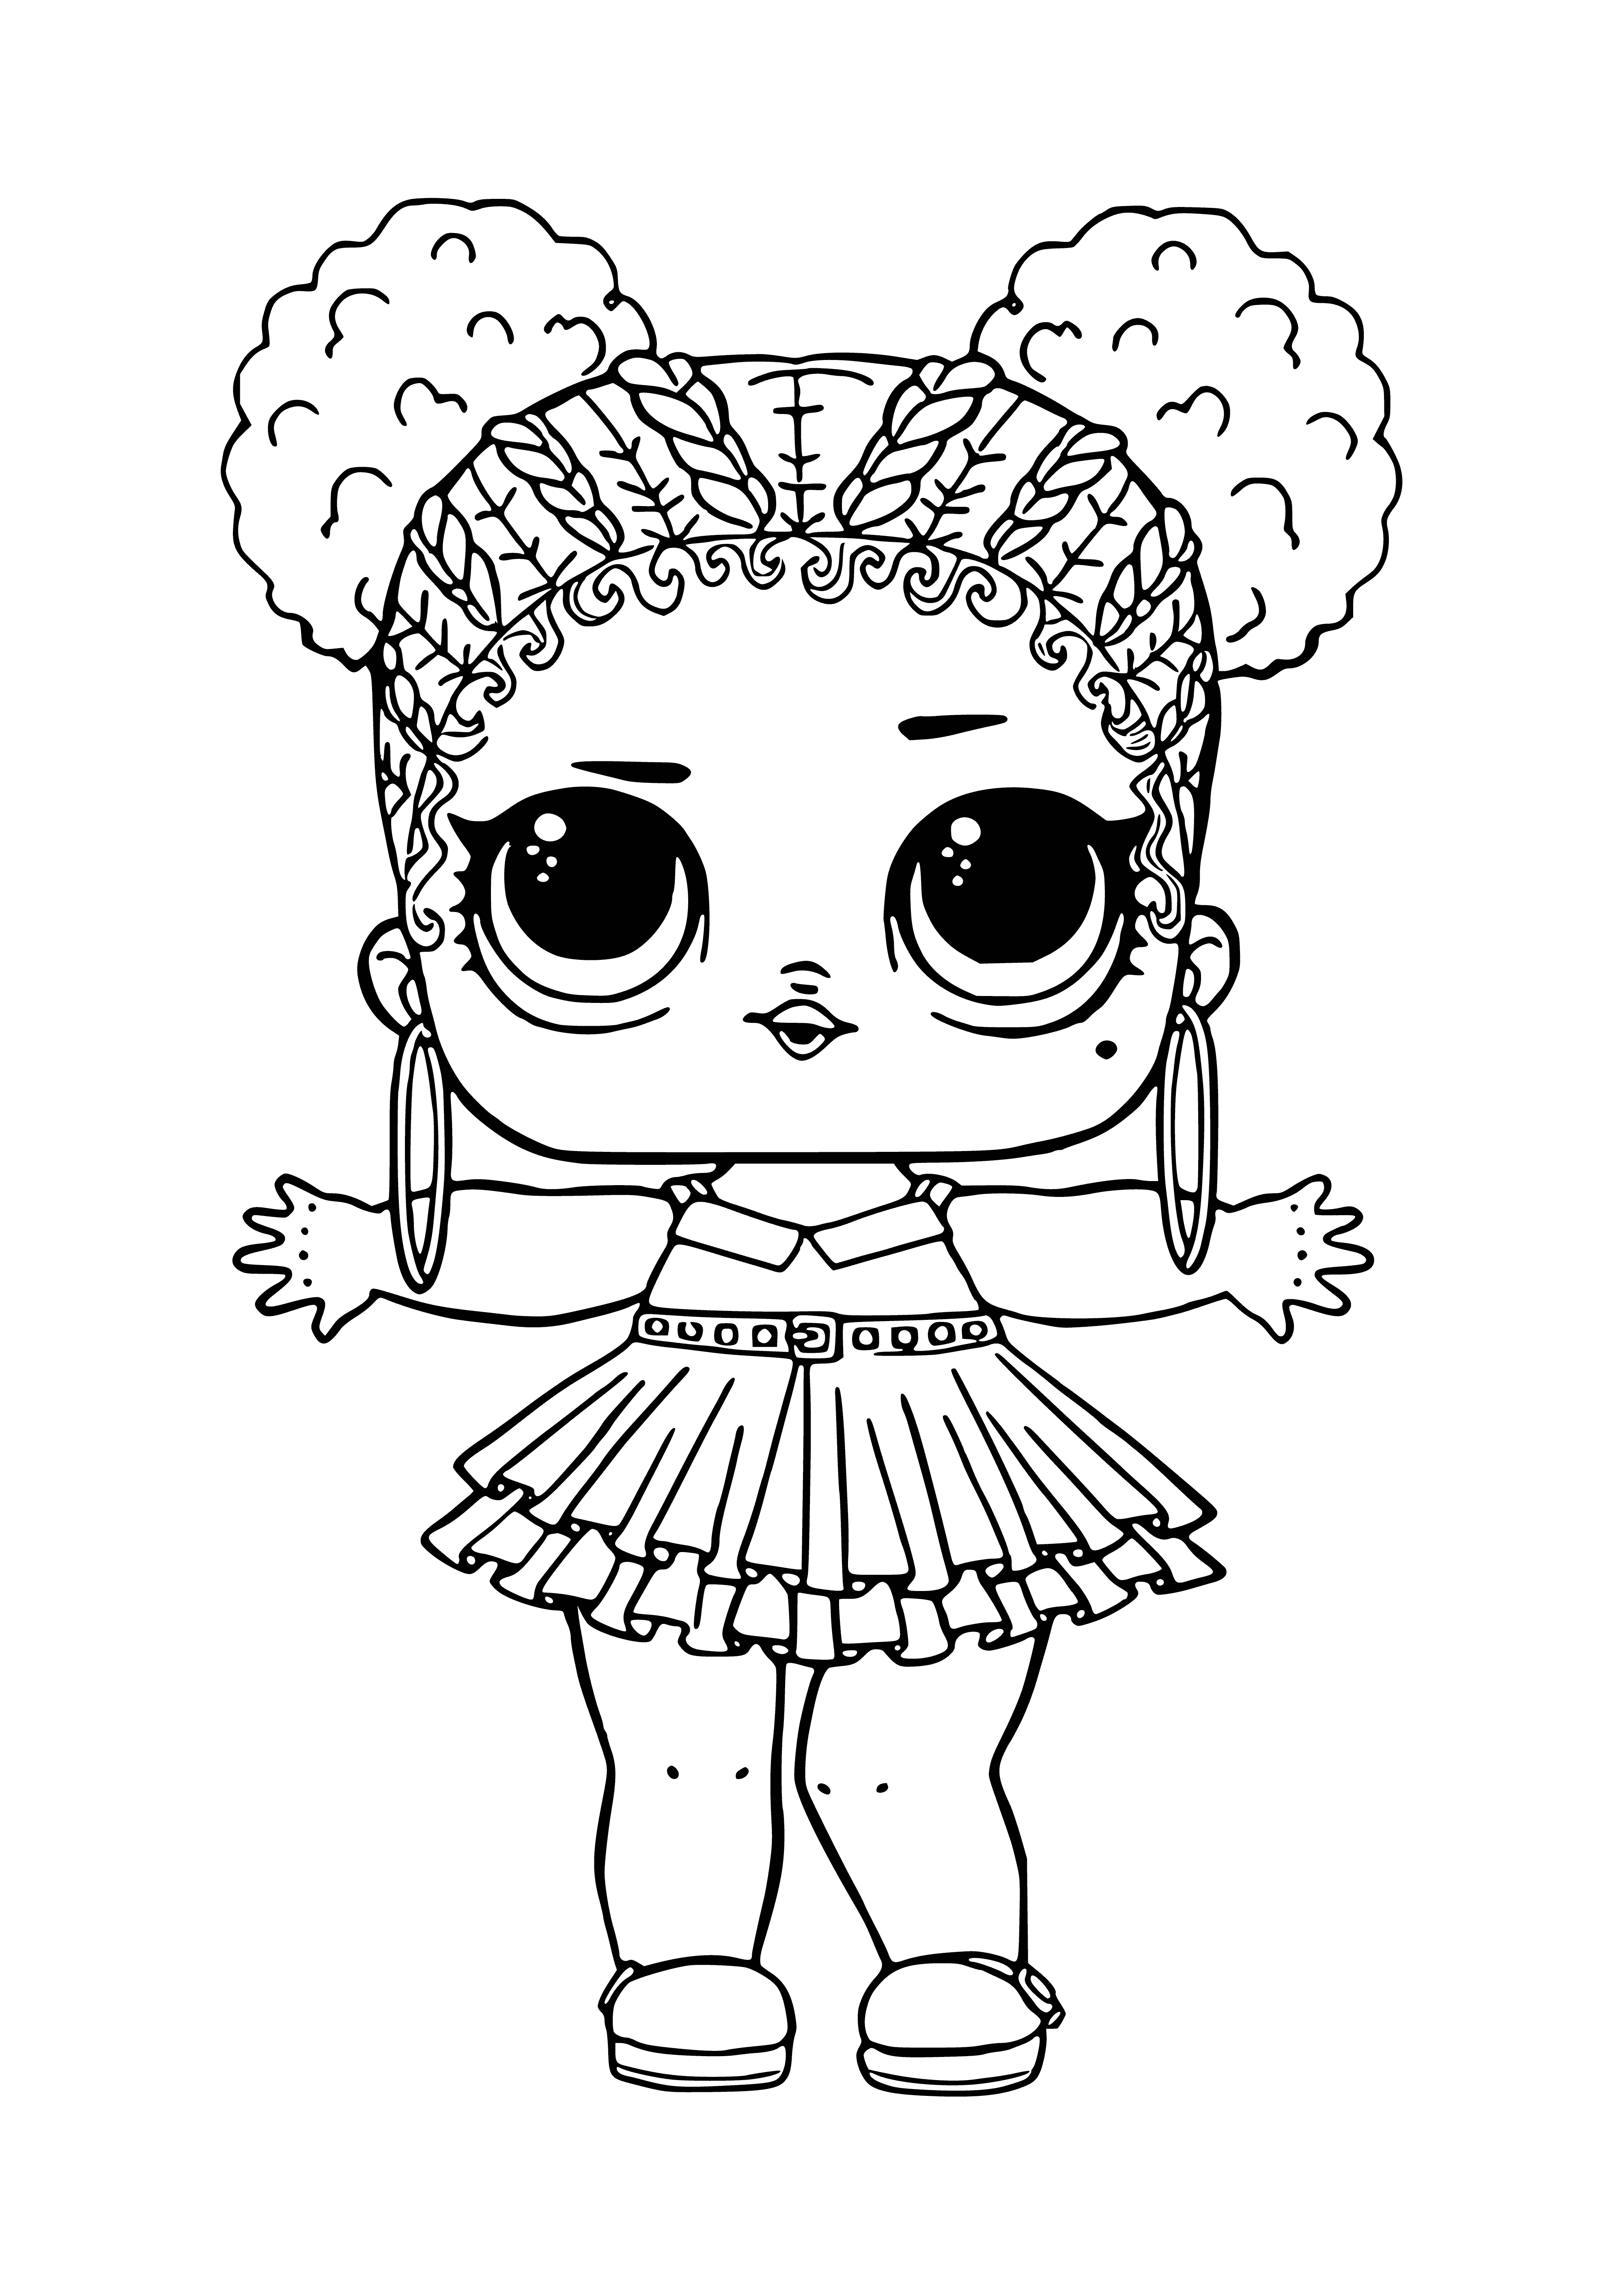 coloring page: Girl with long purple hair in princess attire holds a sceptre & orb while wearing crown & purple dress w/cape.